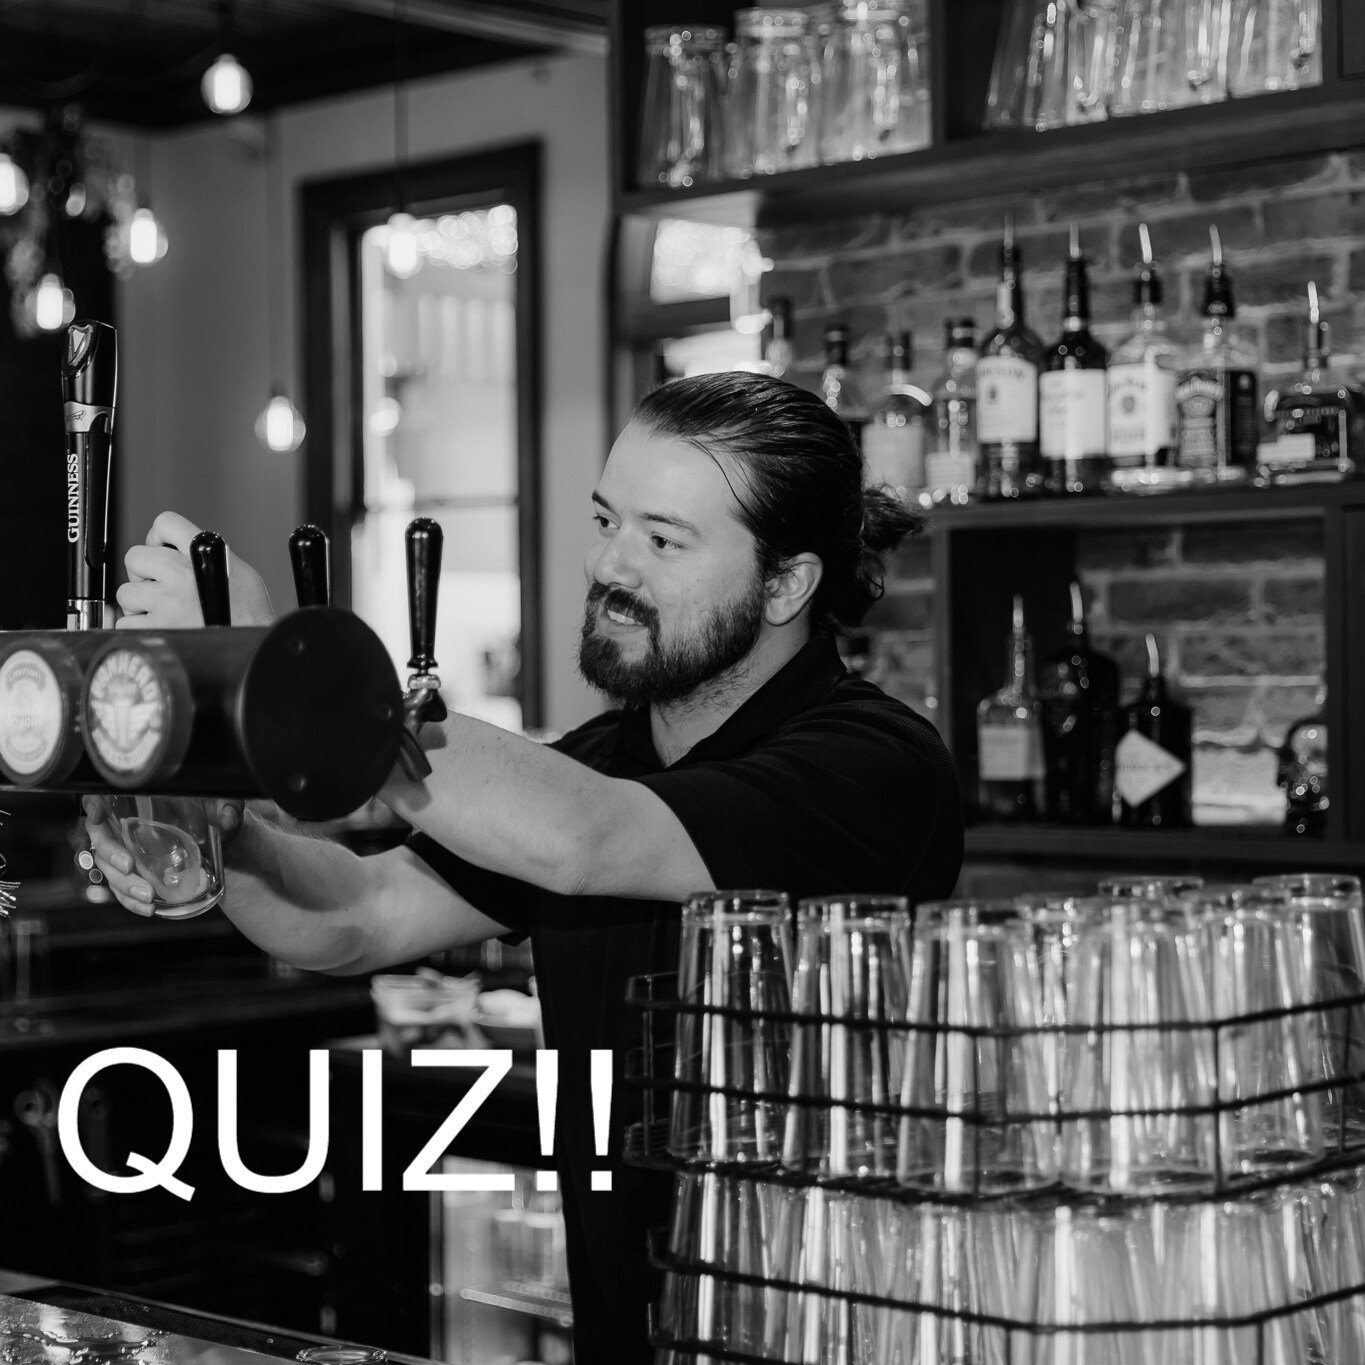 Team!! Quiz is finally back! After a bit of delay we can now FINALLY set the date, woo! Thank you all for your patience. 
The first Pub Quiz of the season will be on Tues 18th April (next Tuesday) at 7pm. Get here for 6:30pm so we can ensure we kick 